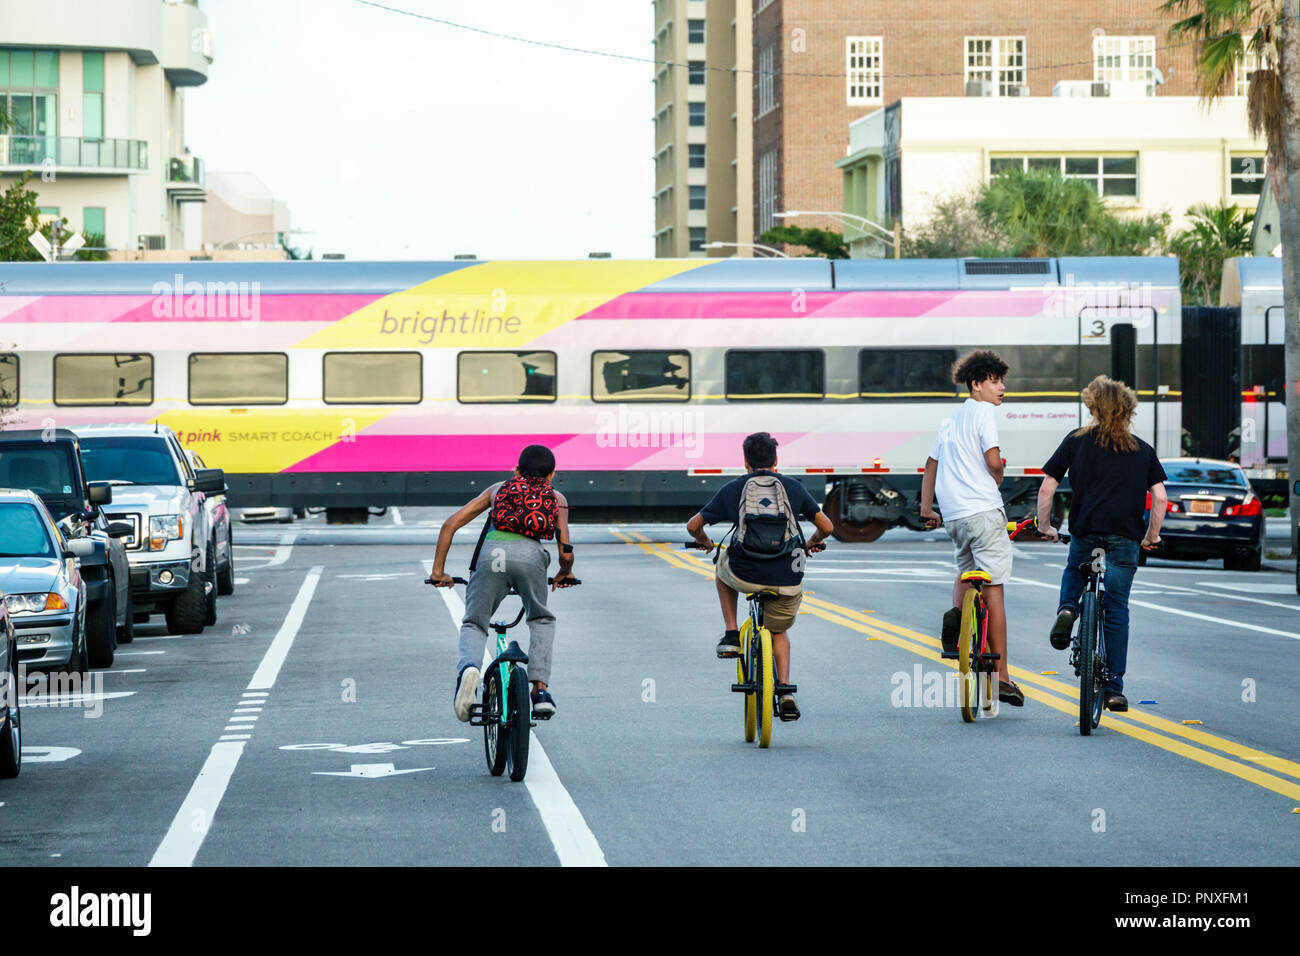 West Palm Beach Florida,passing Brightline Passenger Train,boy boys,male kid kids child children youngster,friends,bicycles bikes riding,middle street Stock Photo